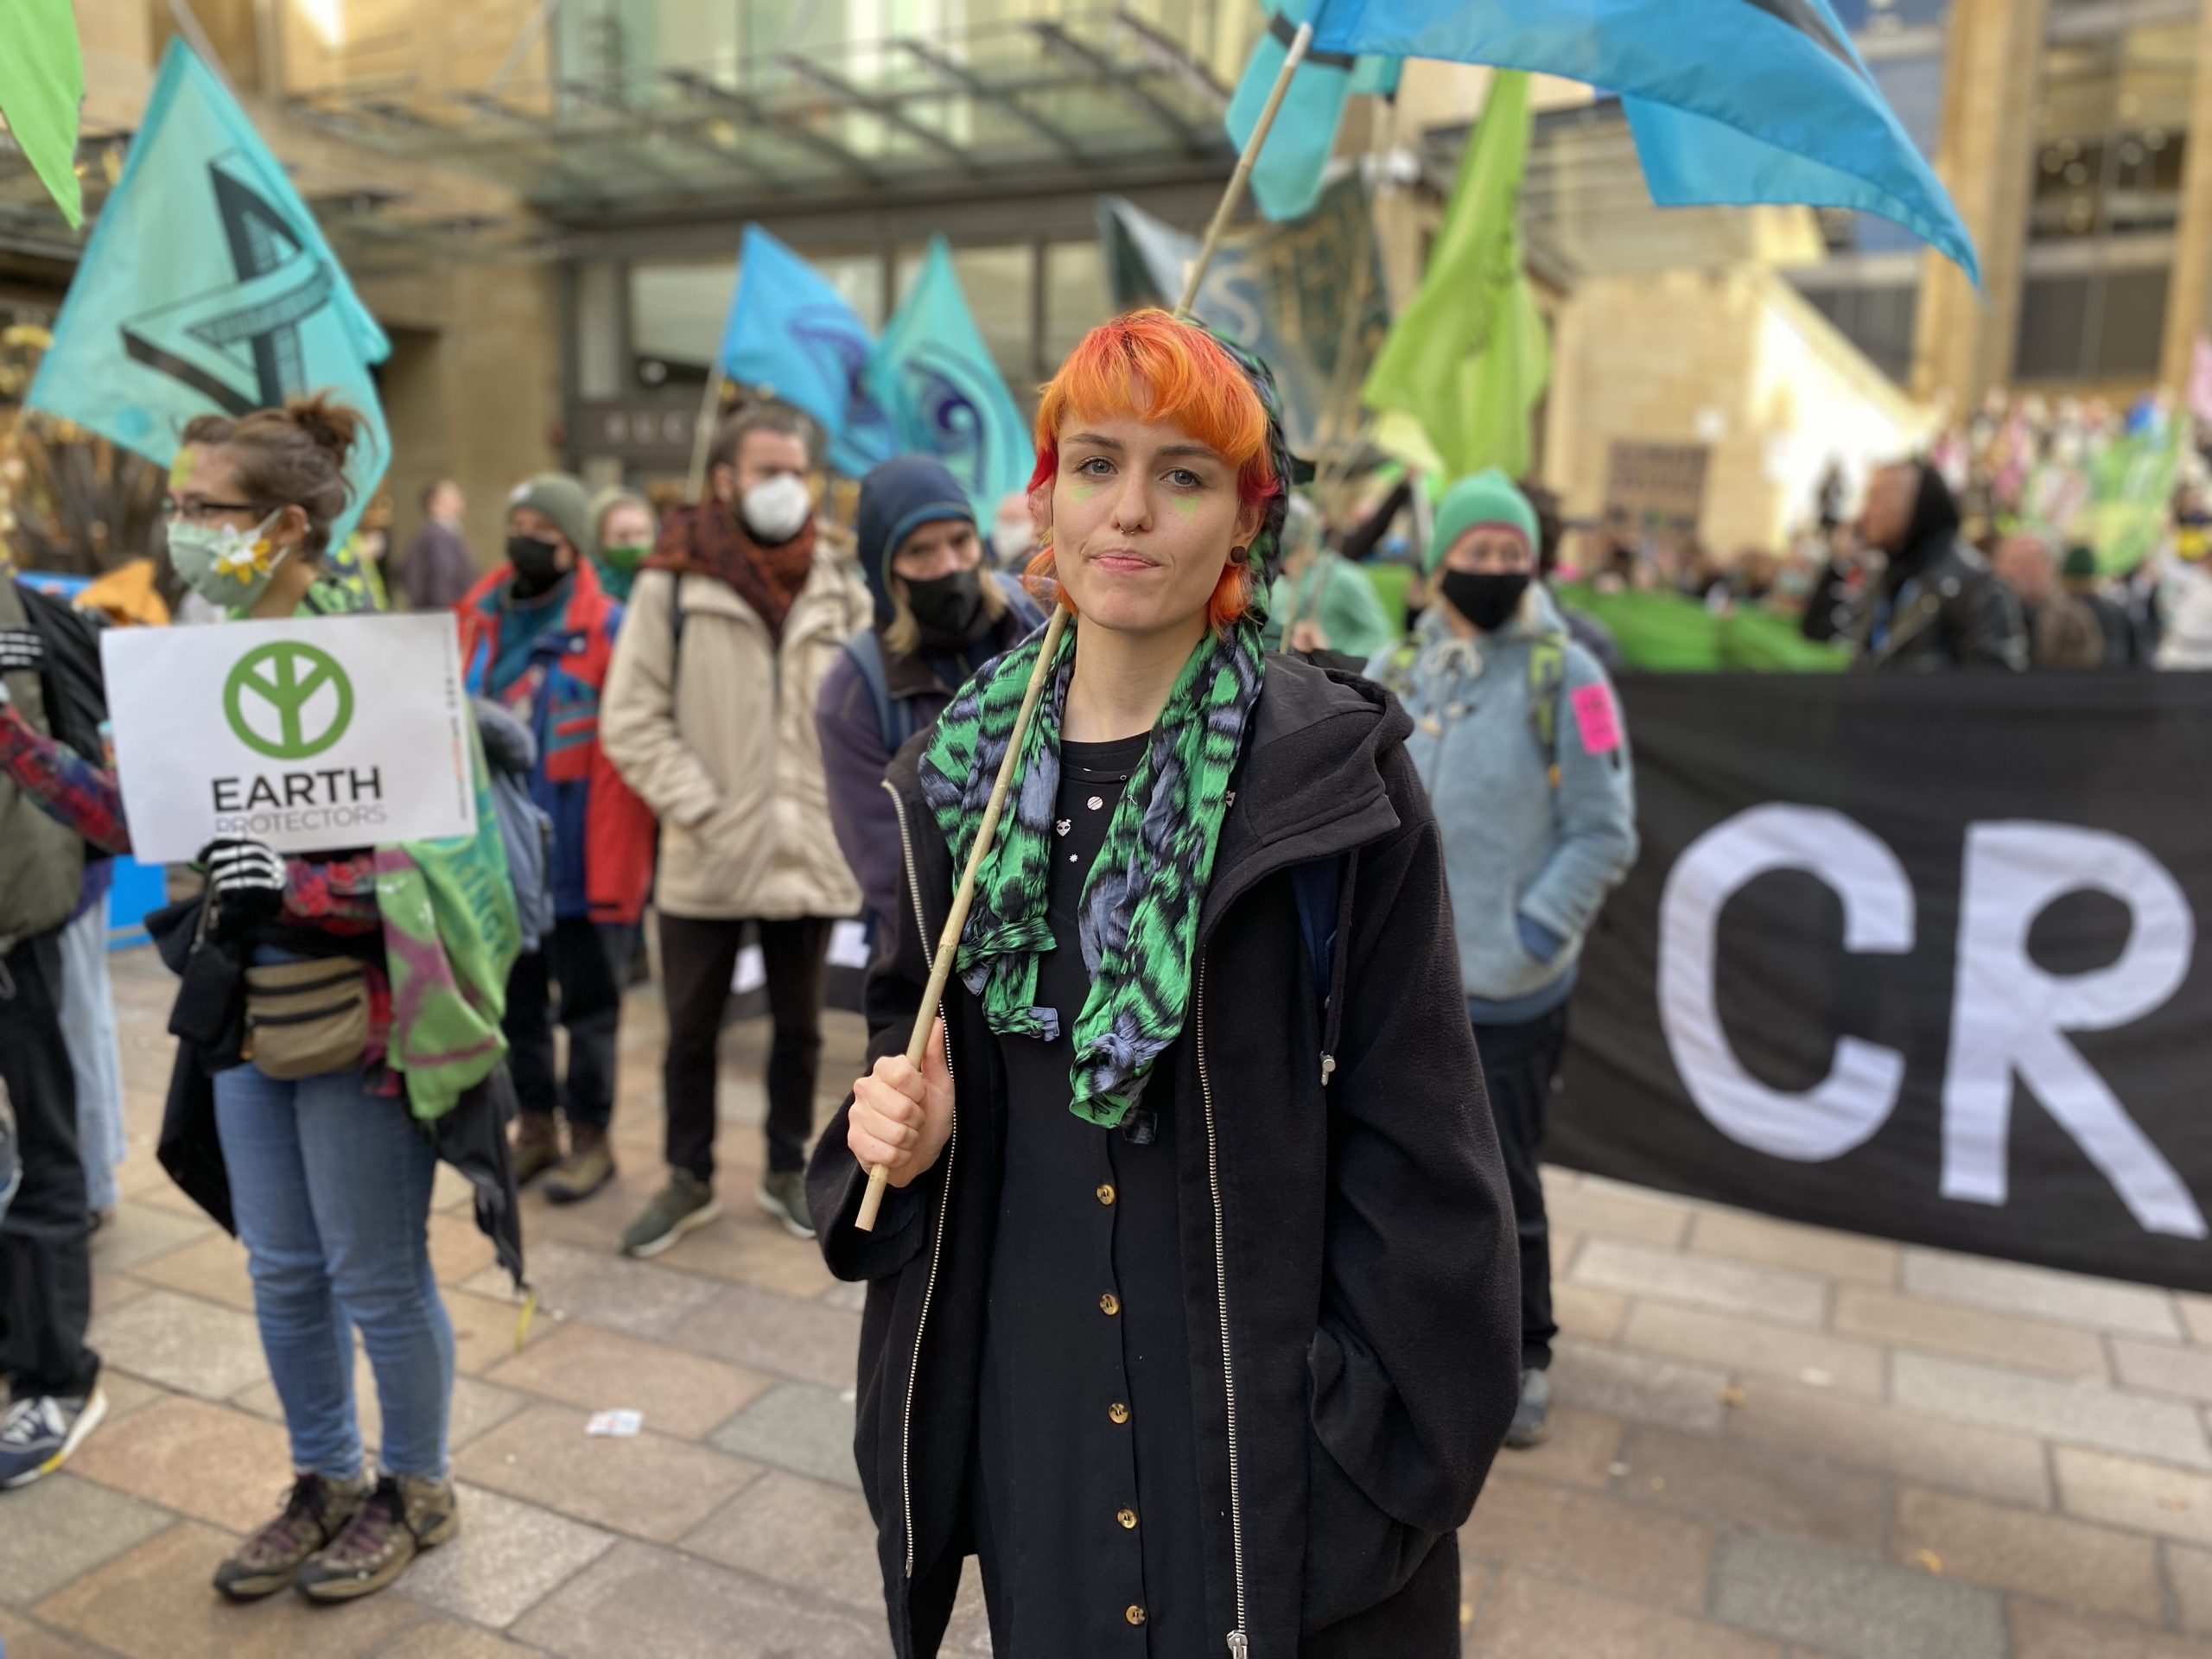 Reina stands amid fellow protestors at the Extinction Rebellion demo in Glasgow. She has orange hair, is wearing a jacket and scarf and is carrying a blue flag.